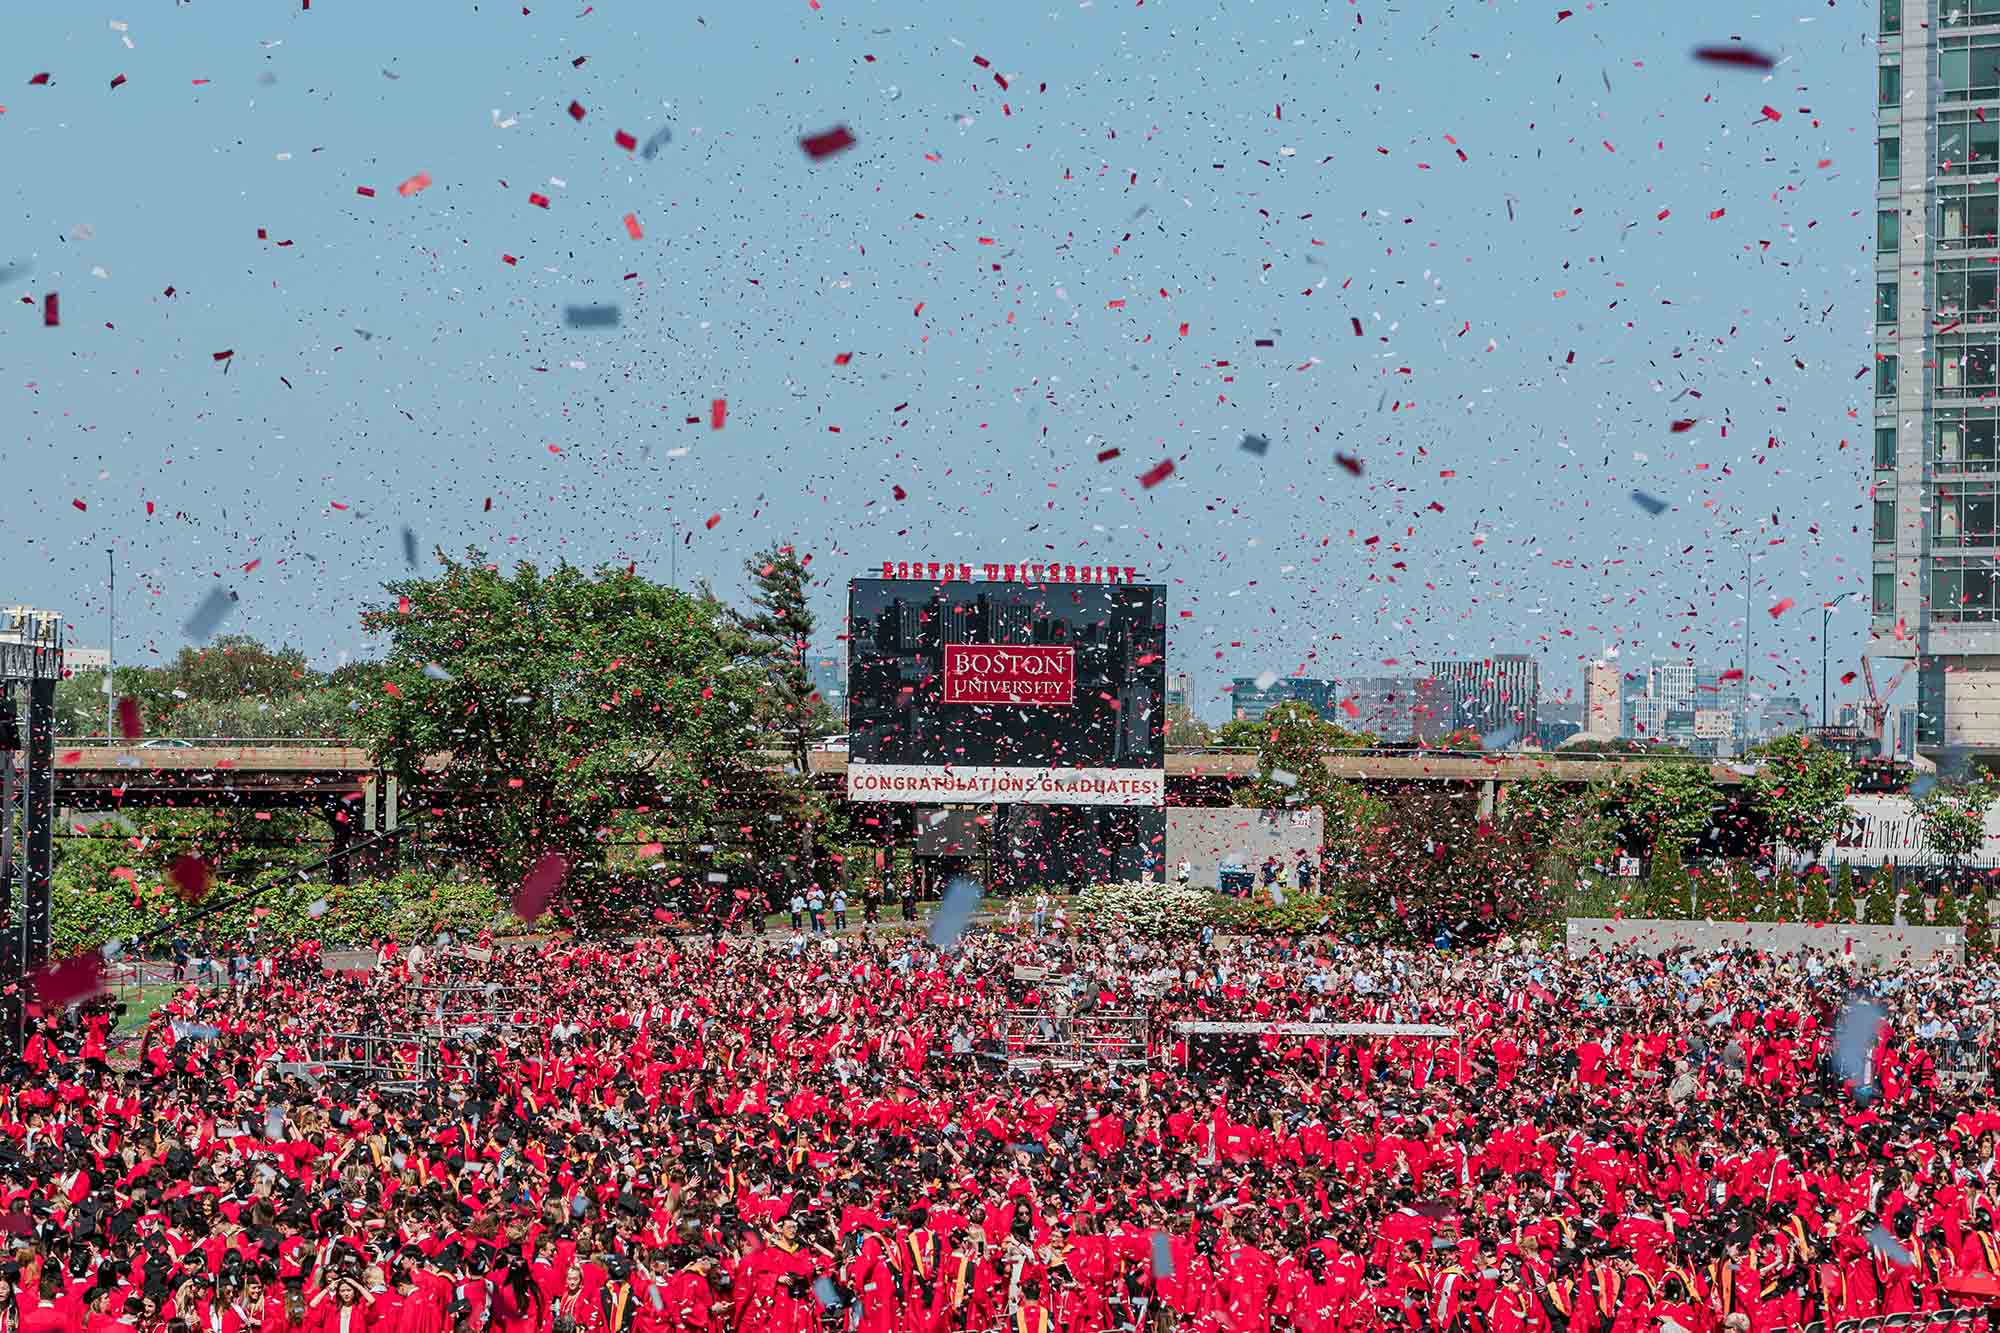 Photo: Graduates wearing red gowns and black graduation caps cheer and celebrate at the end of the 150th Boston University Commencement on Nickerson Field as red and white confetti falls from the air onto them.